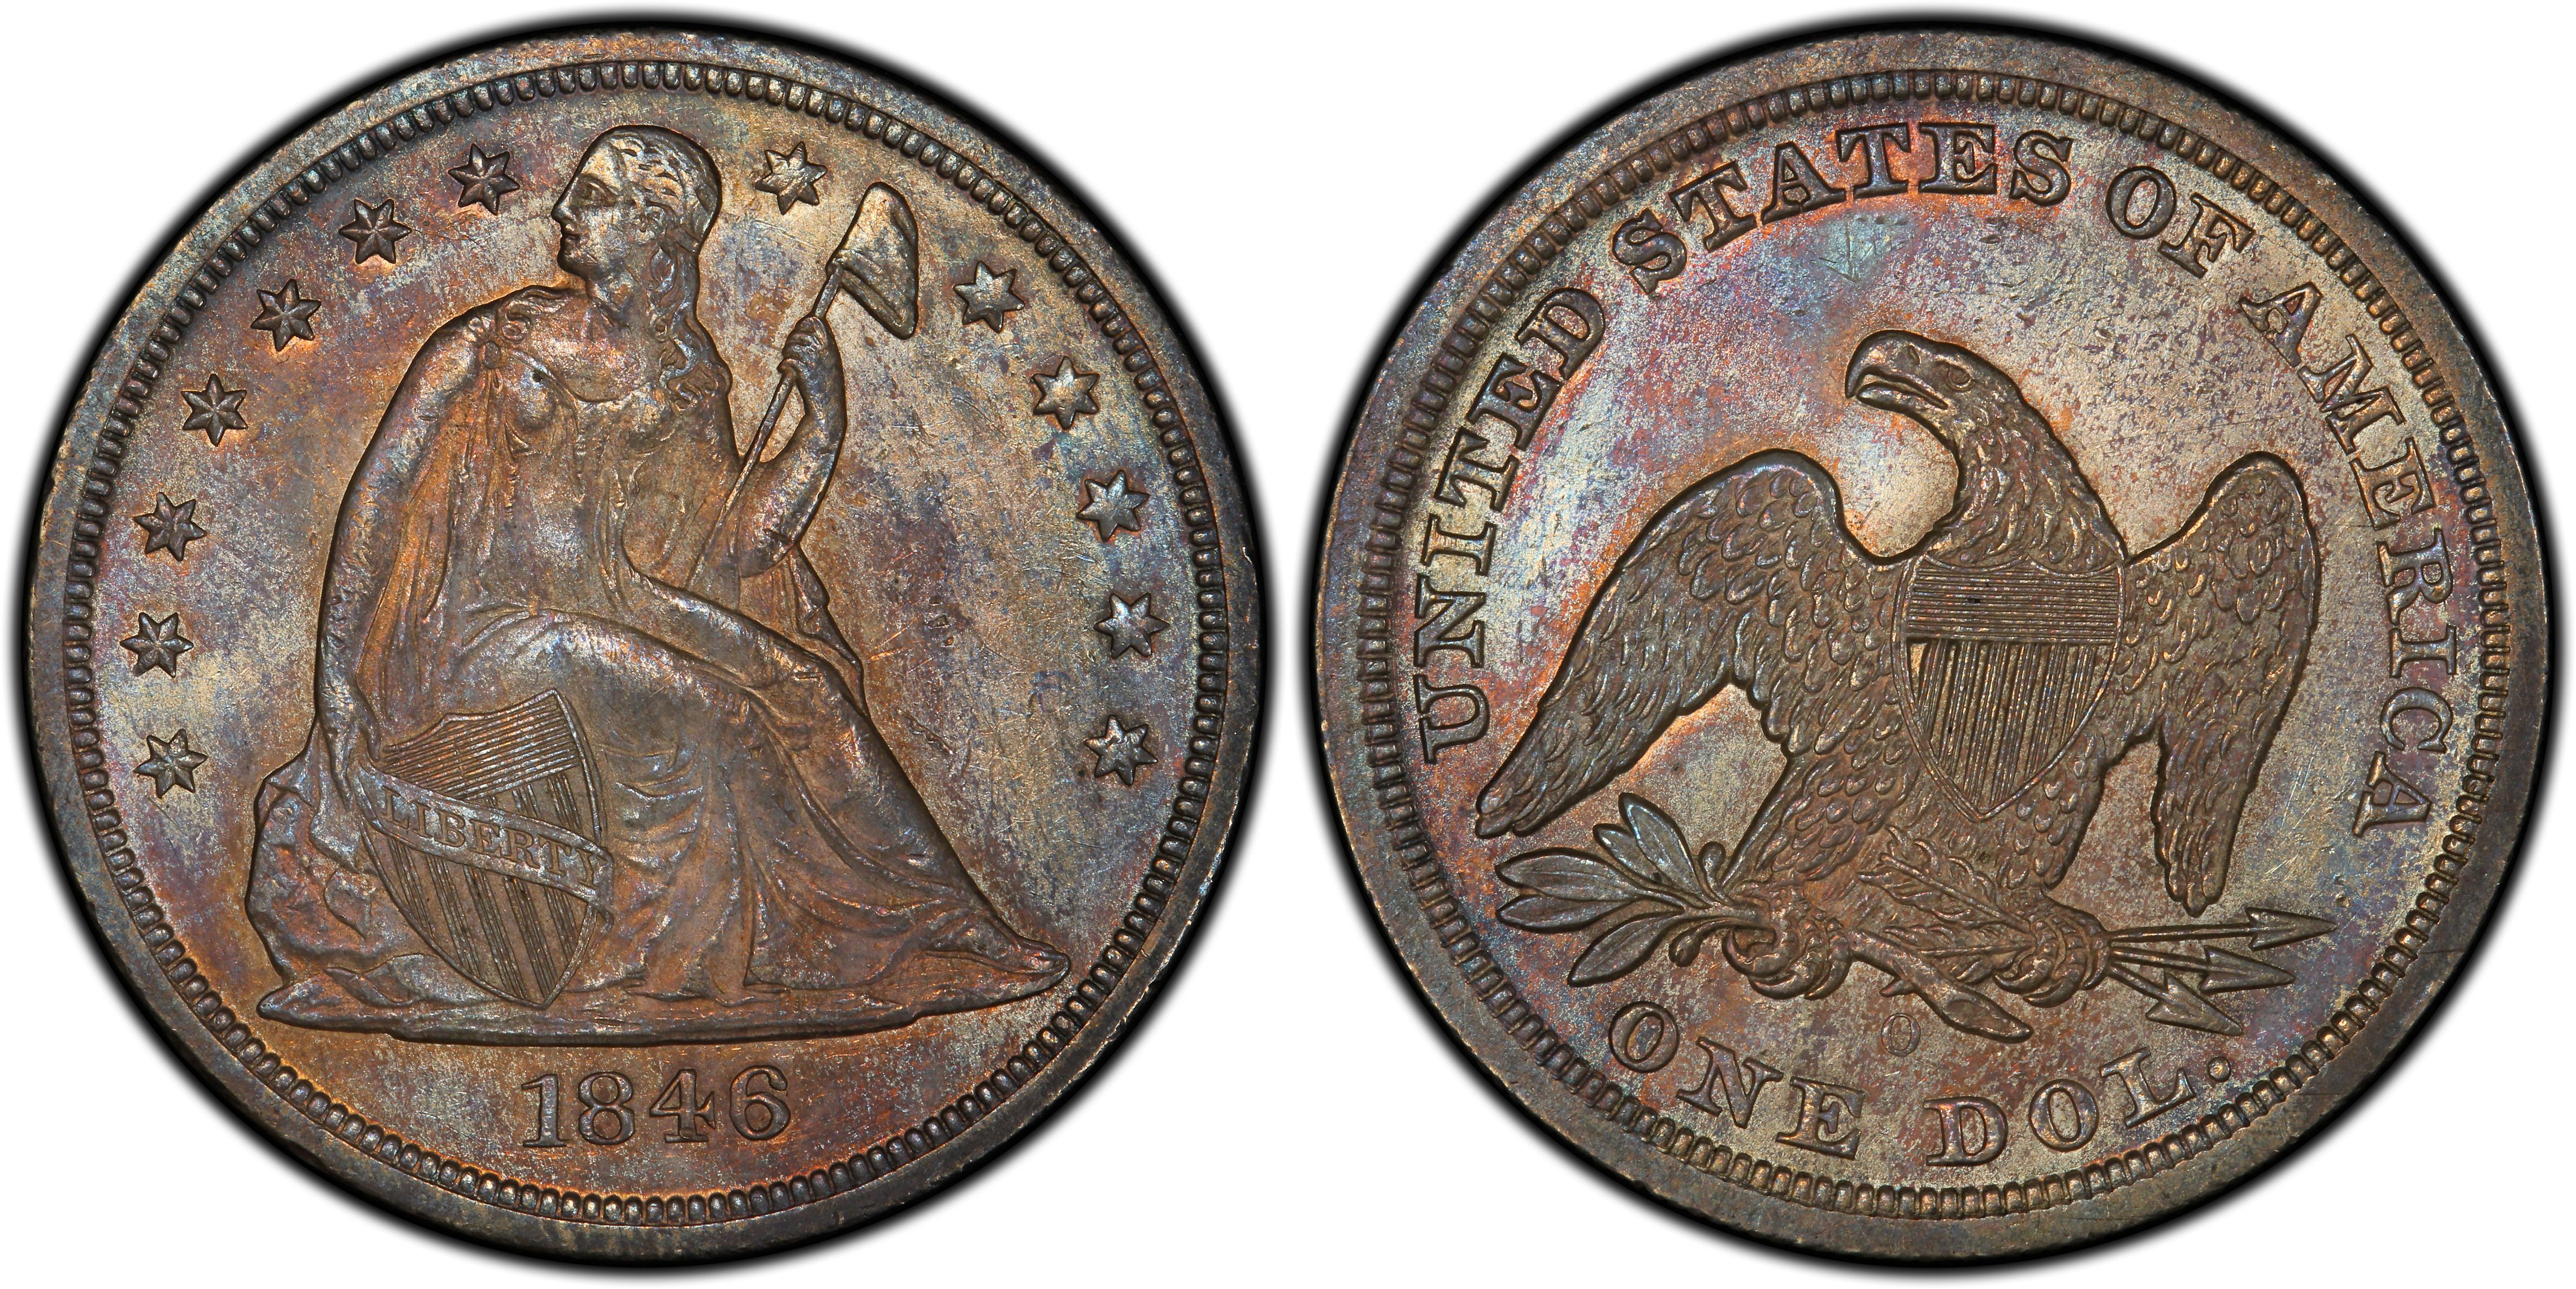 1846-O $1 (Regular Strike) Liberty Seated Dollar - PCGS CoinFacts